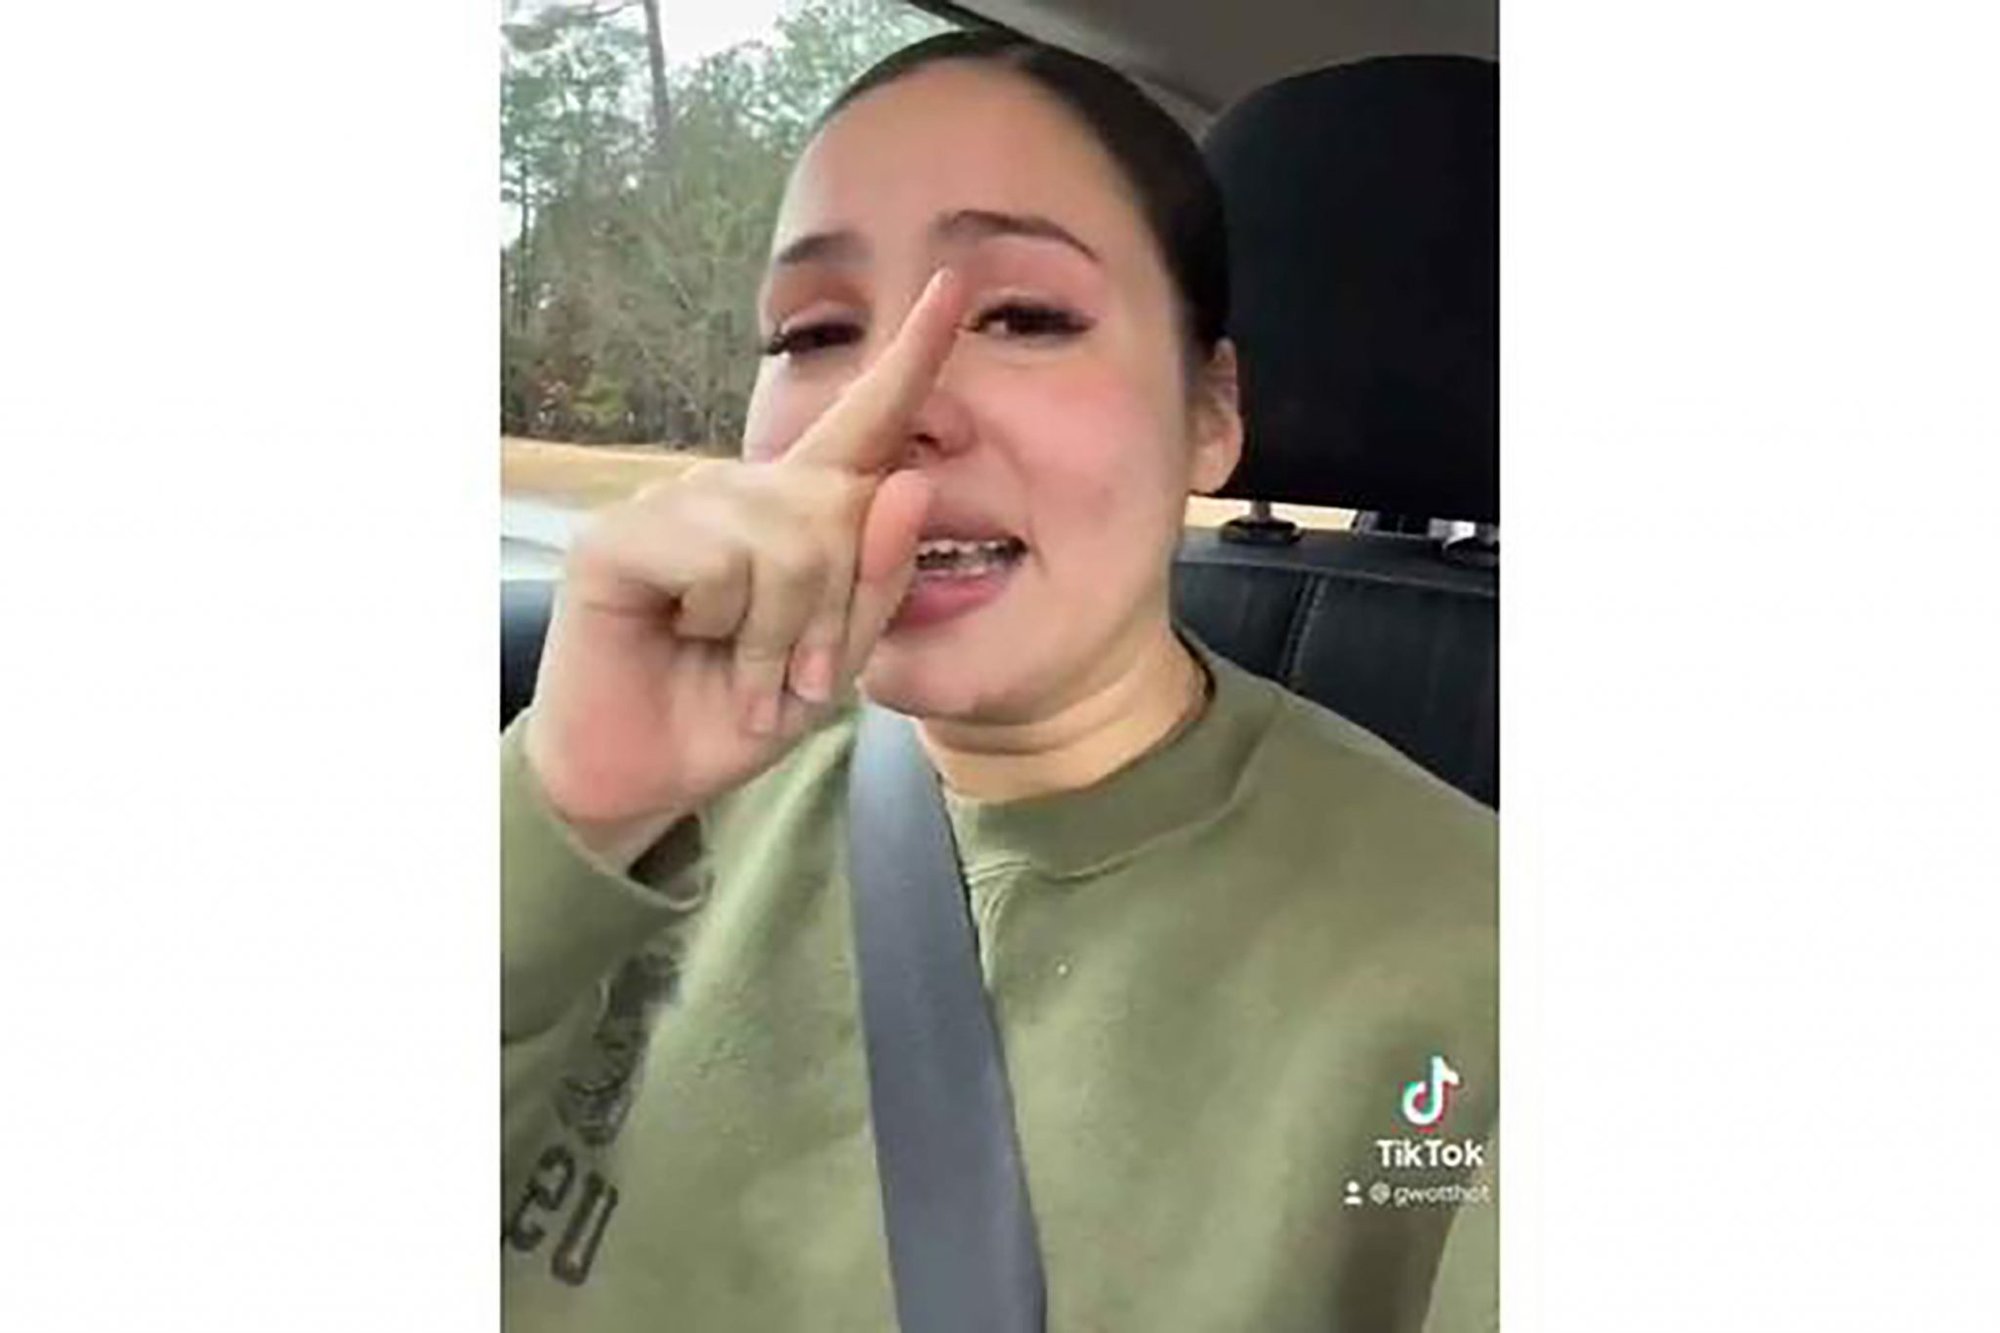 Screenshot of video posted by a U.S. Marine on TikTok regarding the alleged sexual misconduct of a superior. (TikTok)